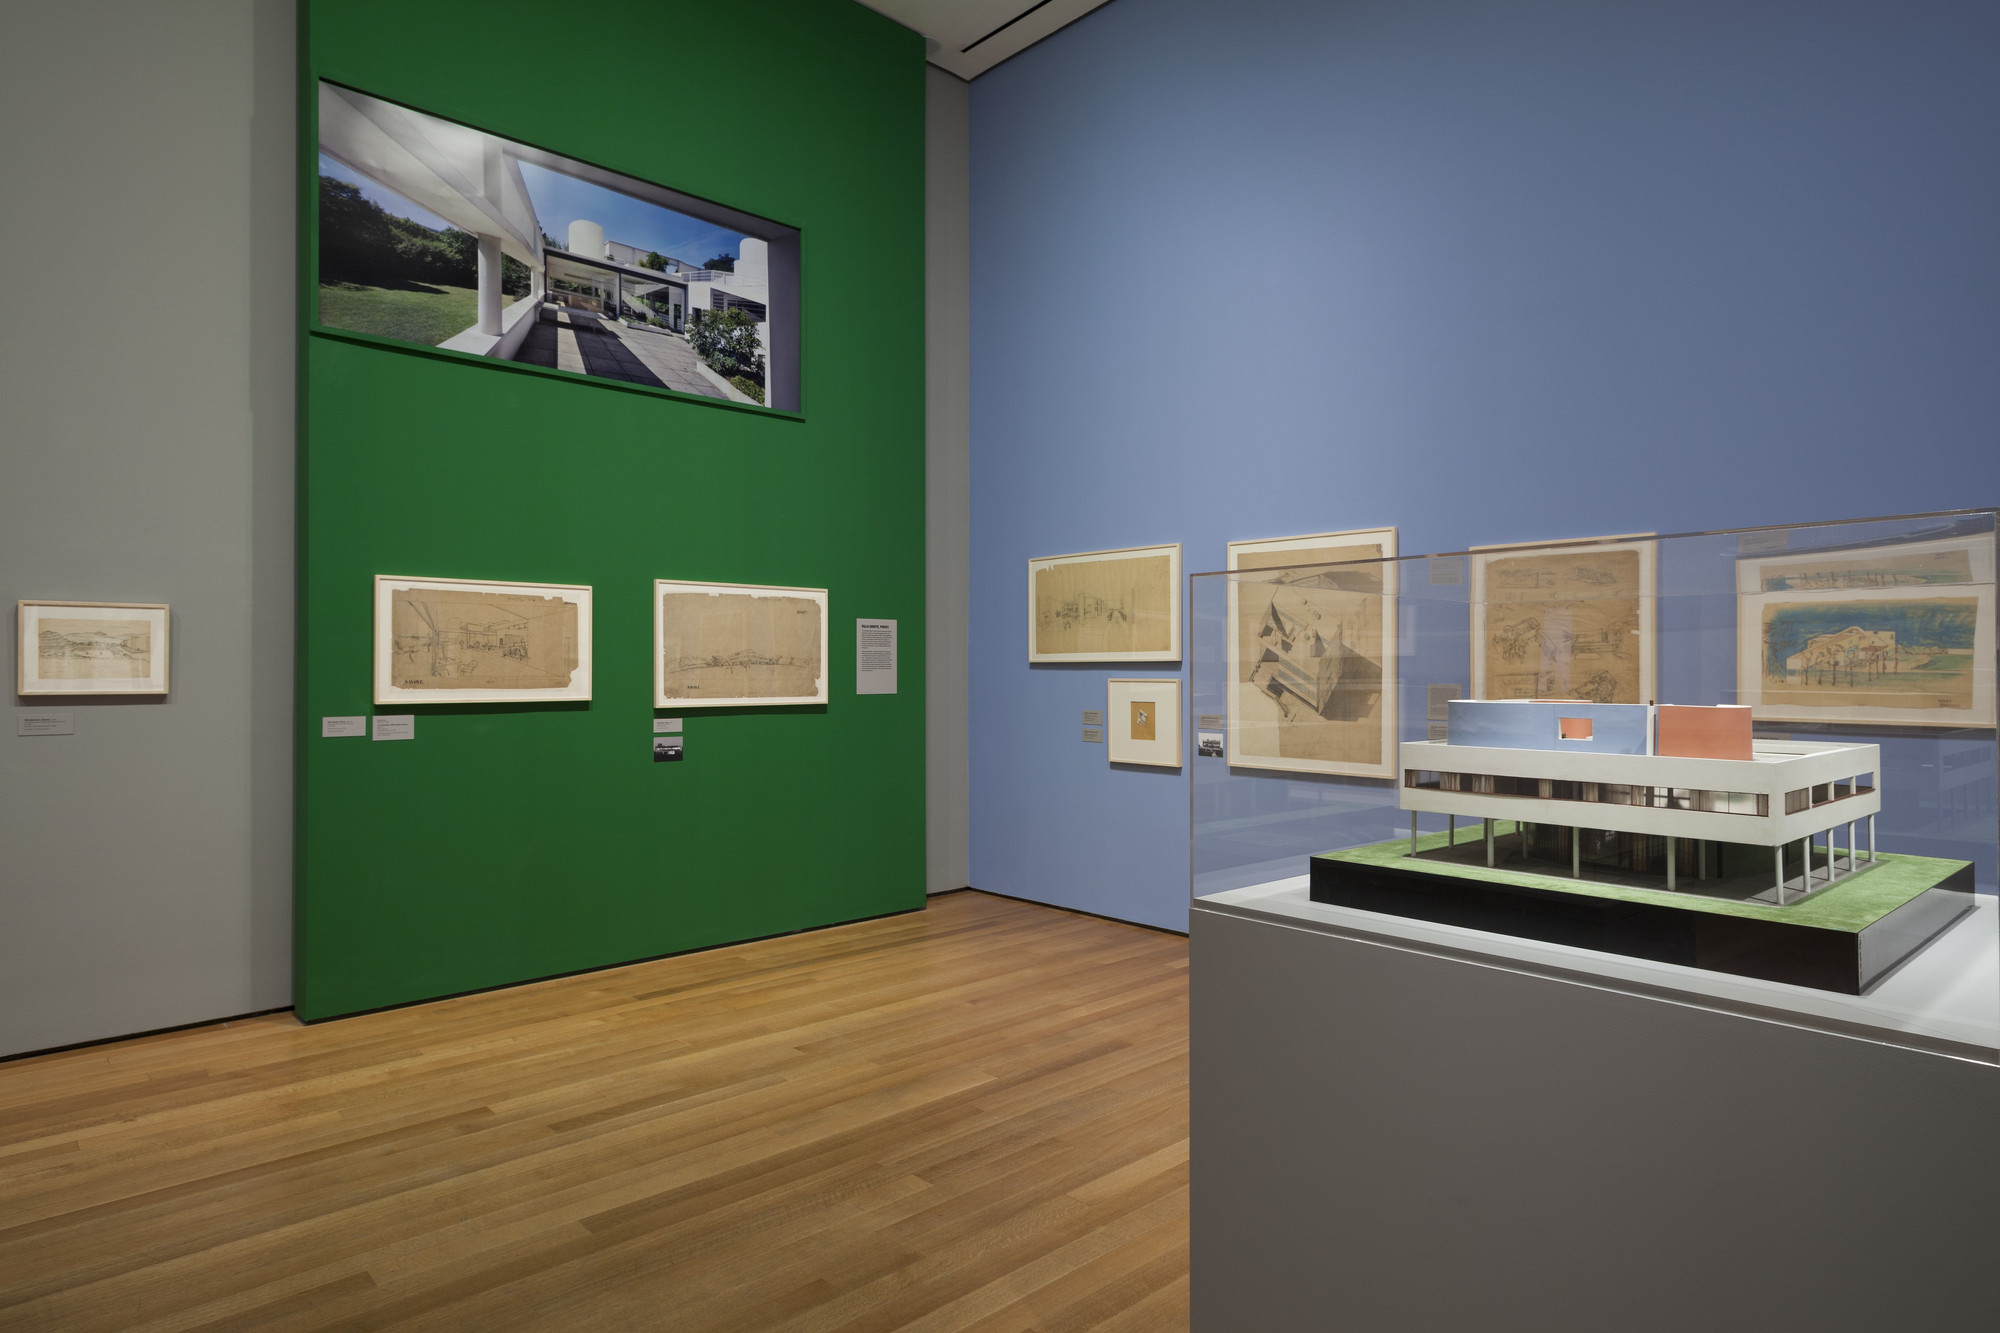 Installation of the exhibition, "Le Corbusier: An Atlas Landscapes" | MoMA